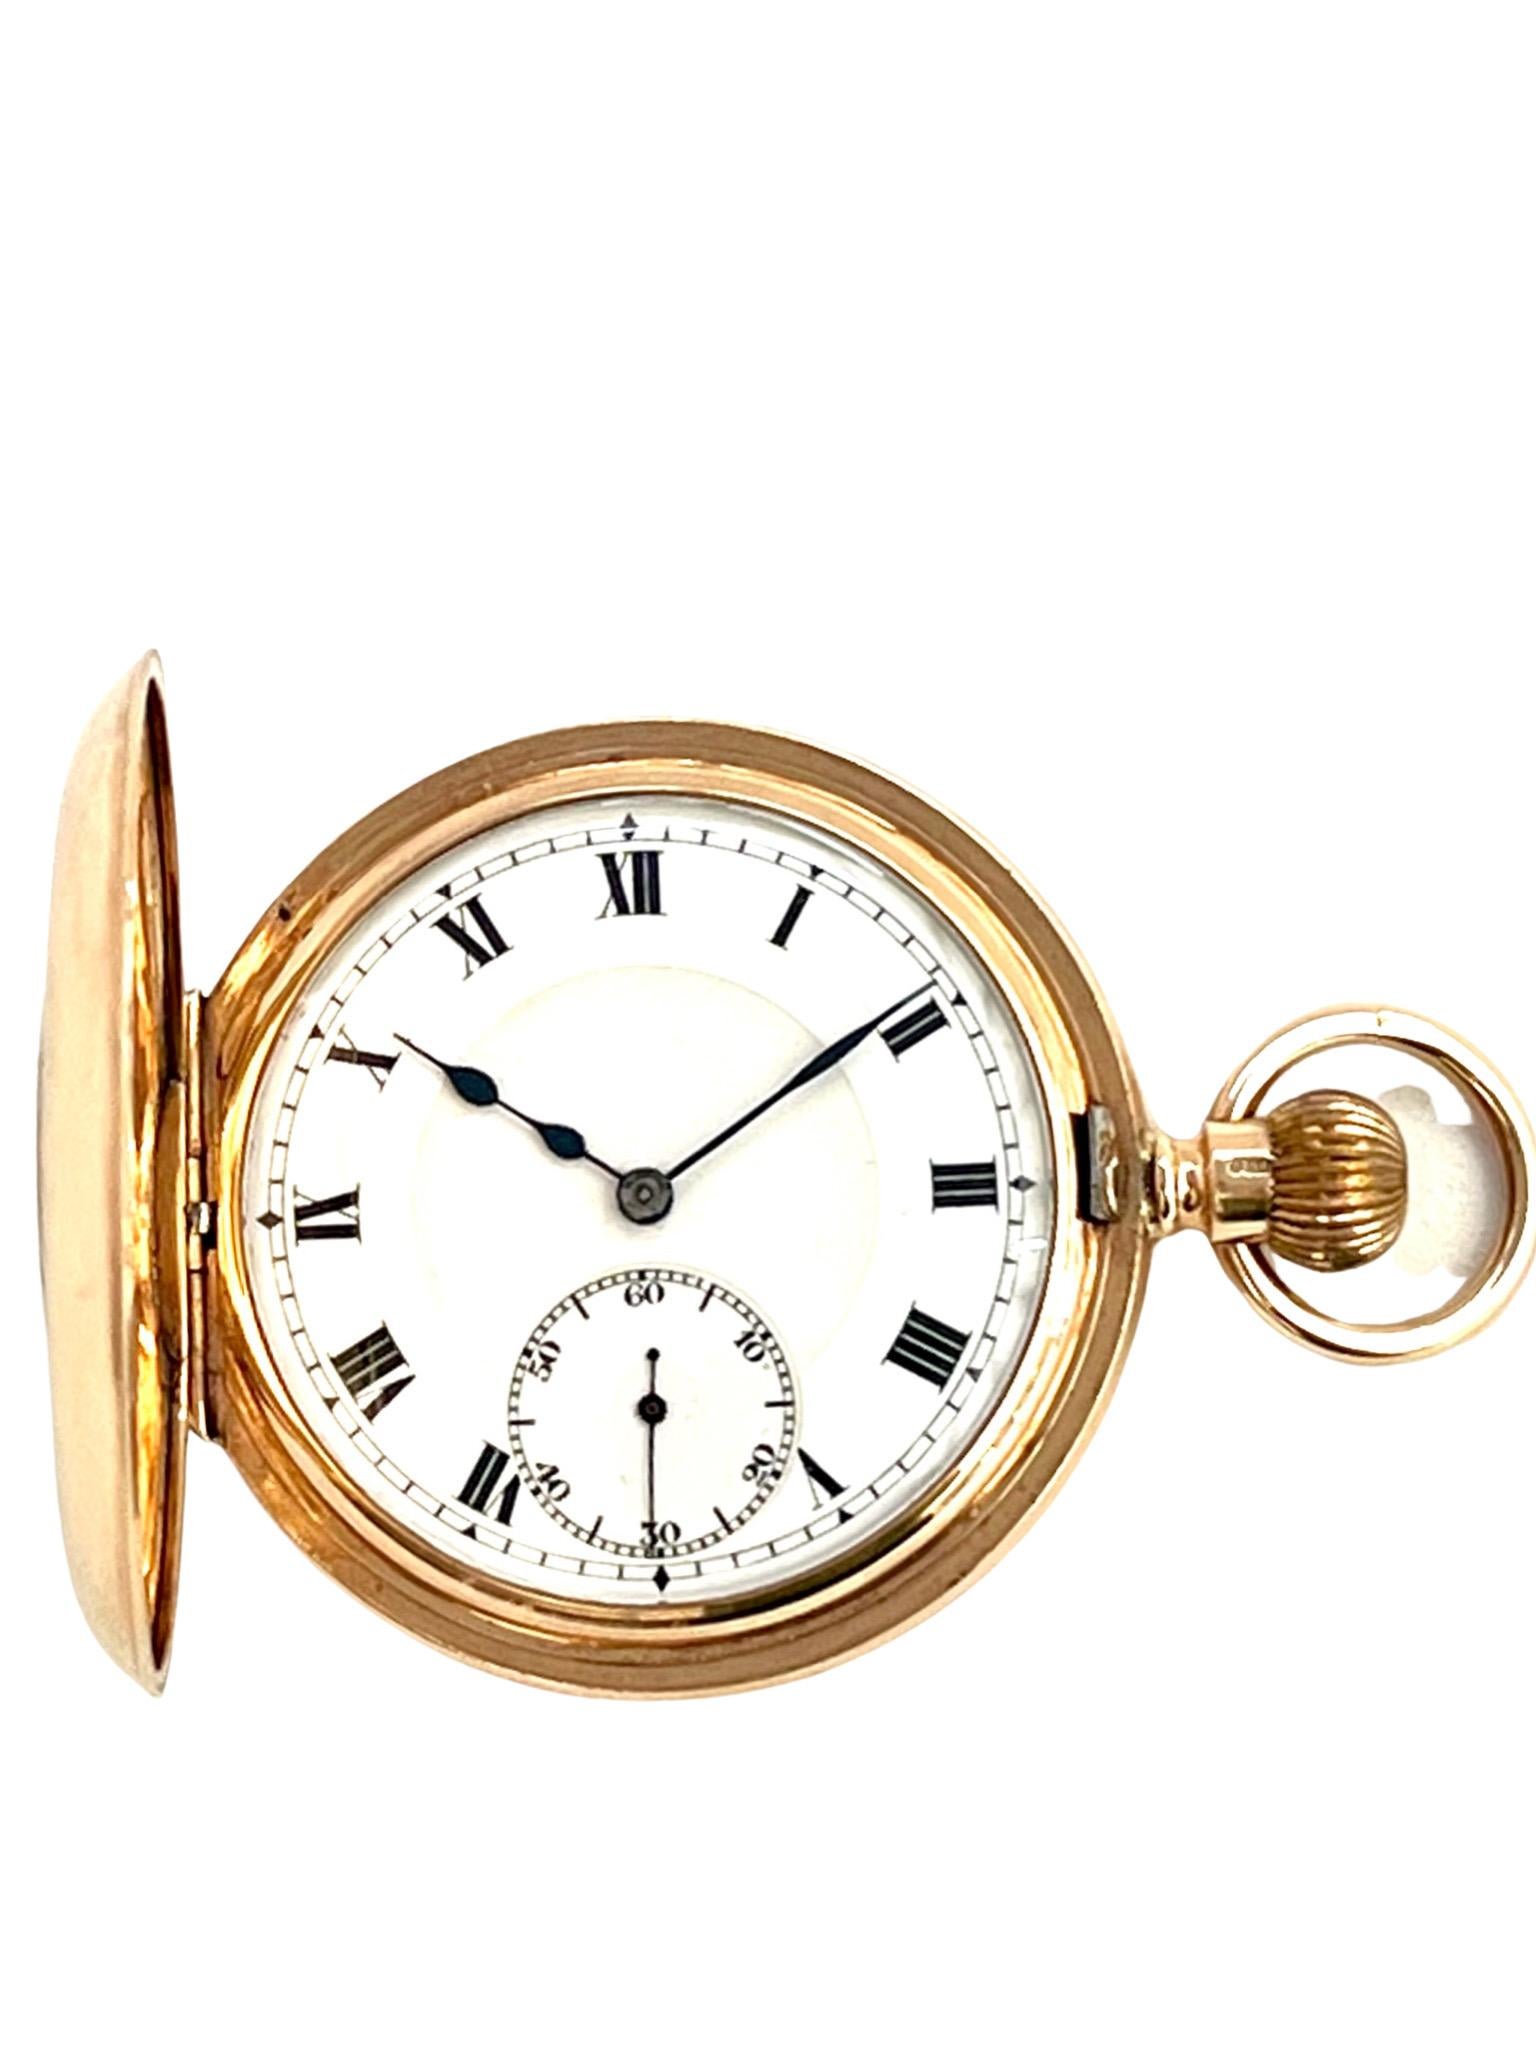 A substantial 9 carat solid gold half hunter pocket watch by Syren Watch Company, Switzerland. Fully hallmarked Chester, 1922

With a gold winding crown and bow to the top, the outer engraved Roman dial on the case front with central glass and